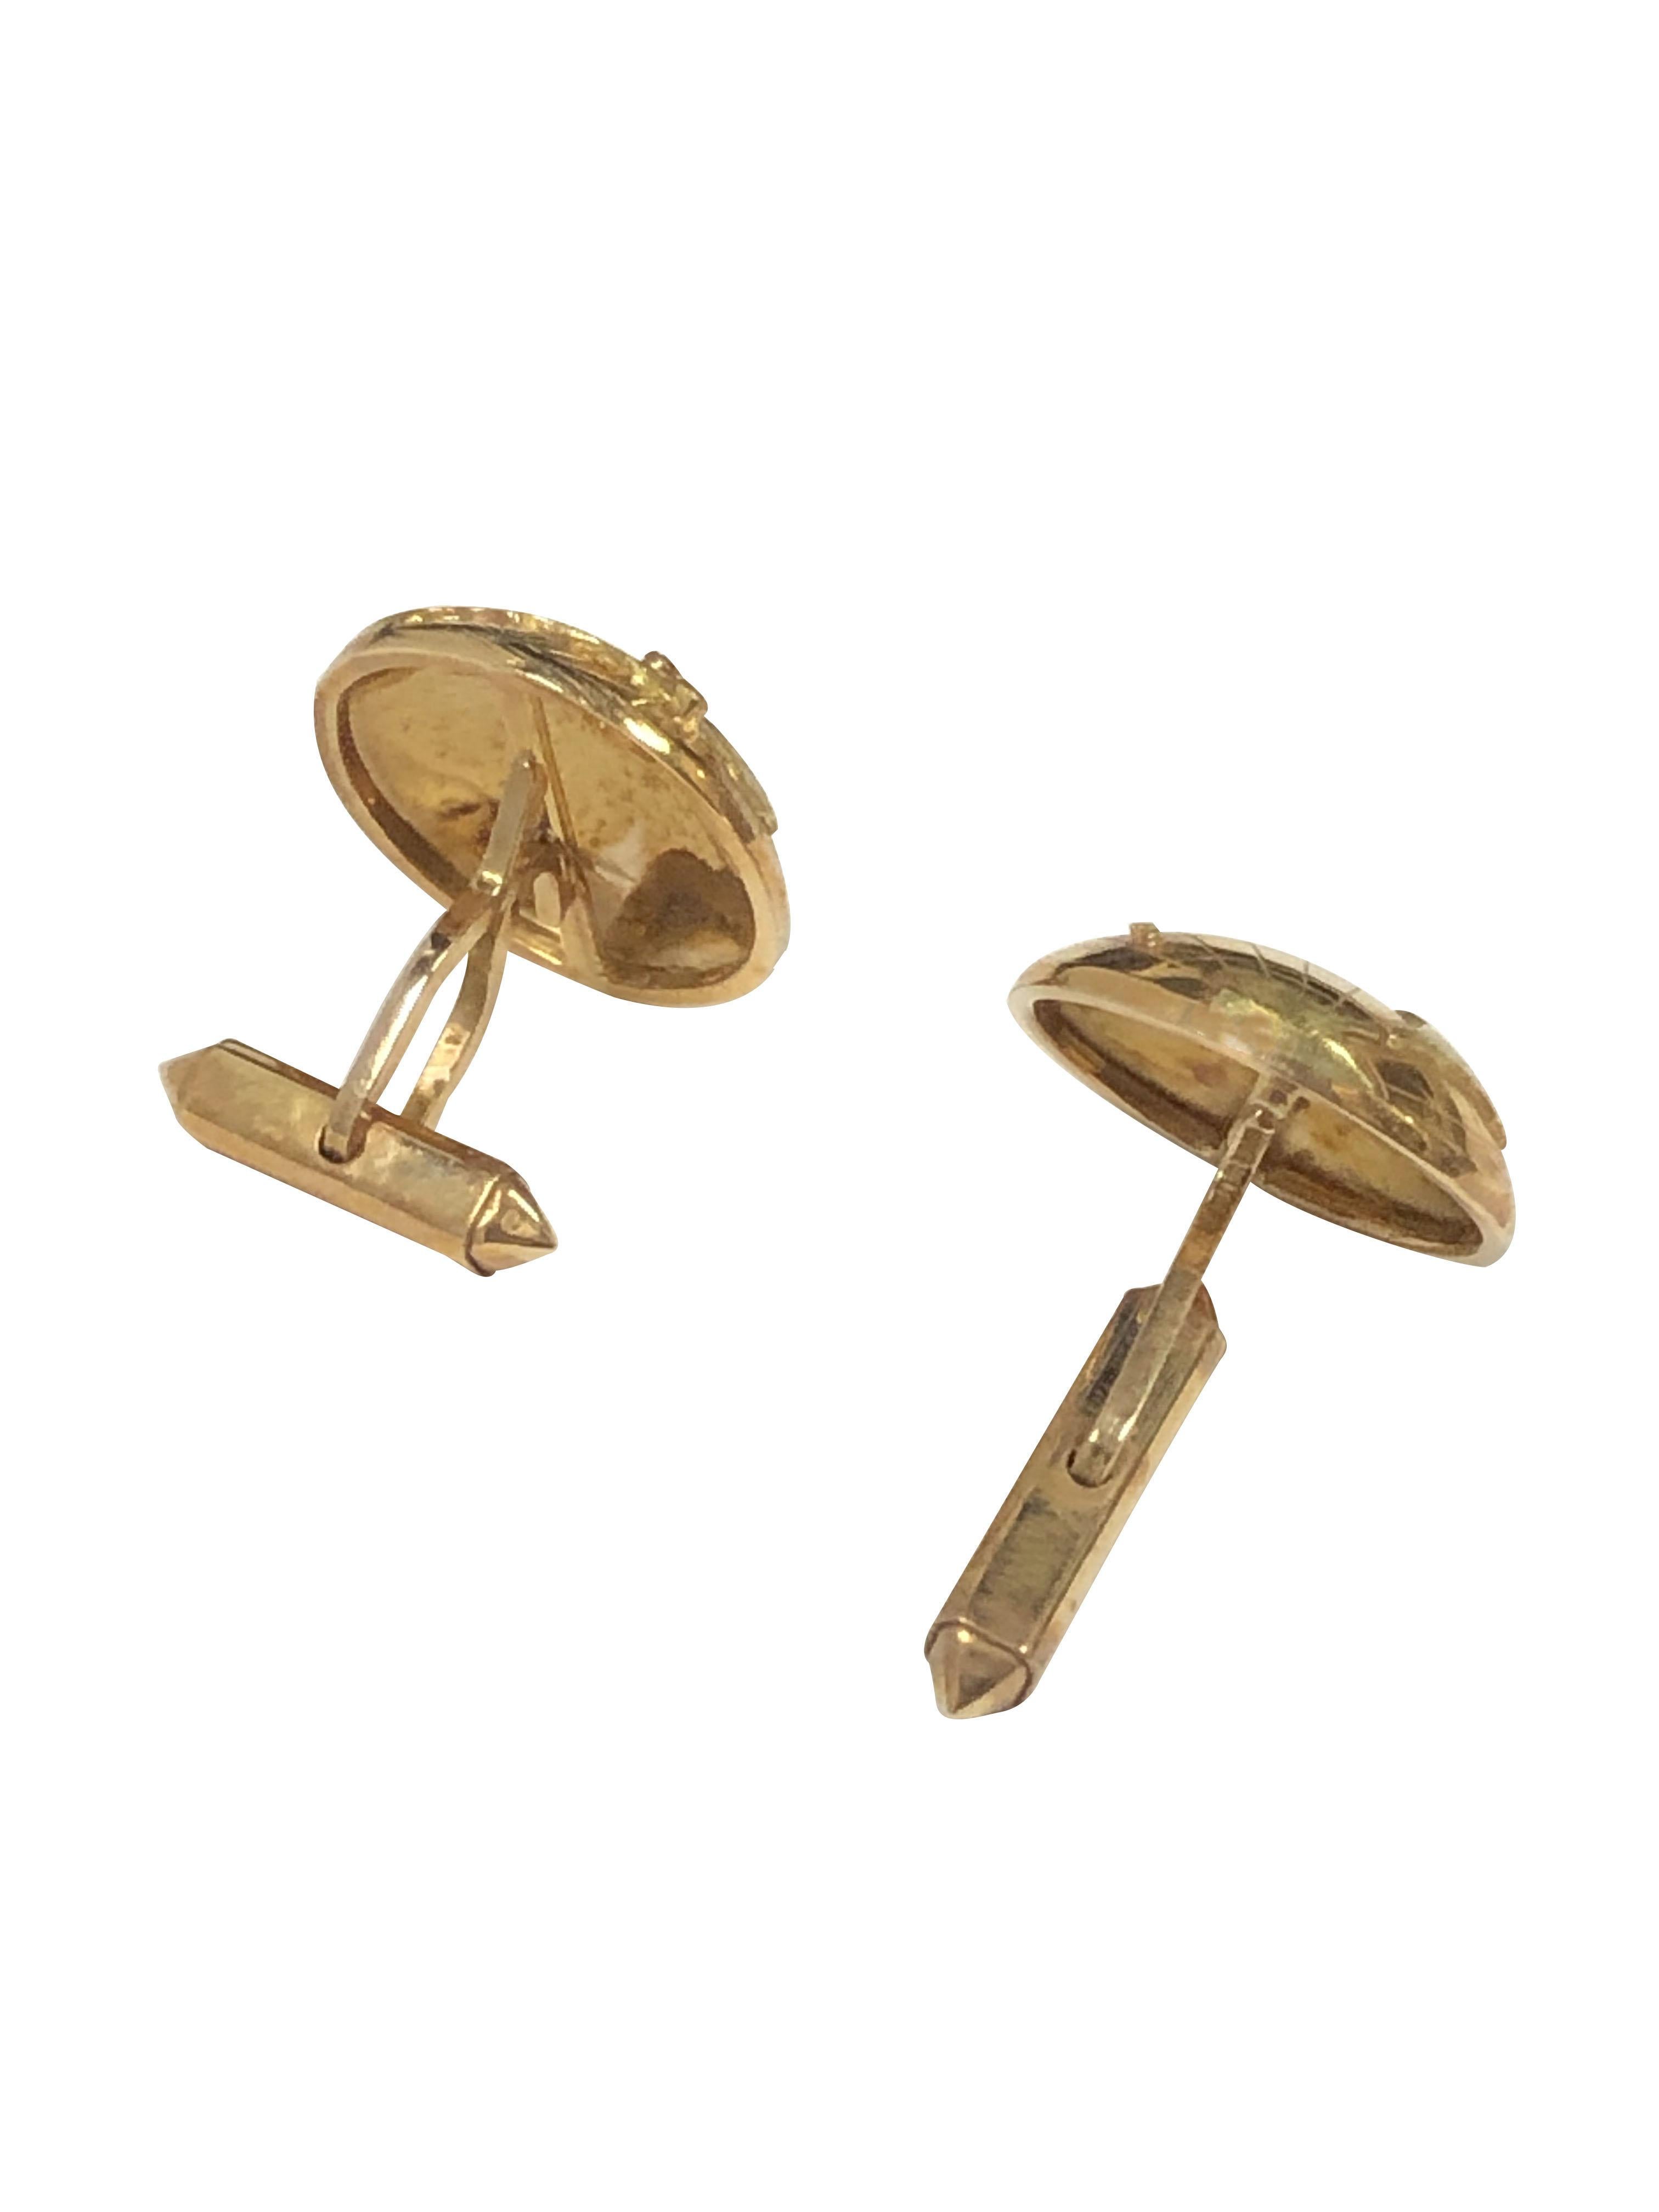 Women's or Men's Vintage Yellow Gold Figural Whimsical Globe Cufflinks For Sale